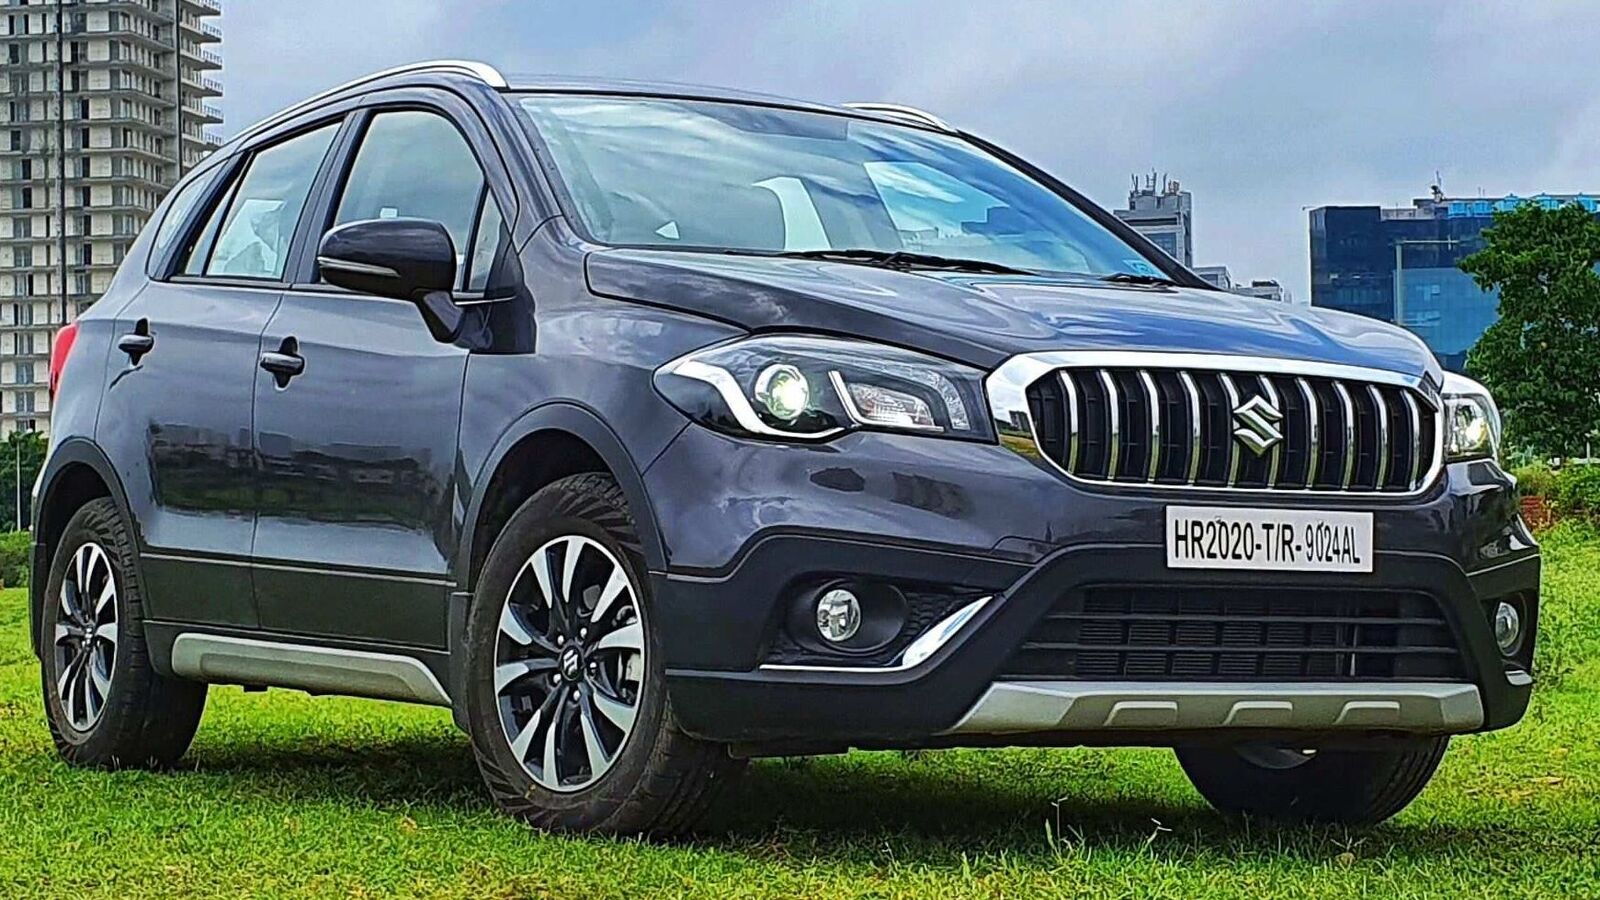 Maruti Suzuki silently removes S-Cross from Nexa website. What's cooking?